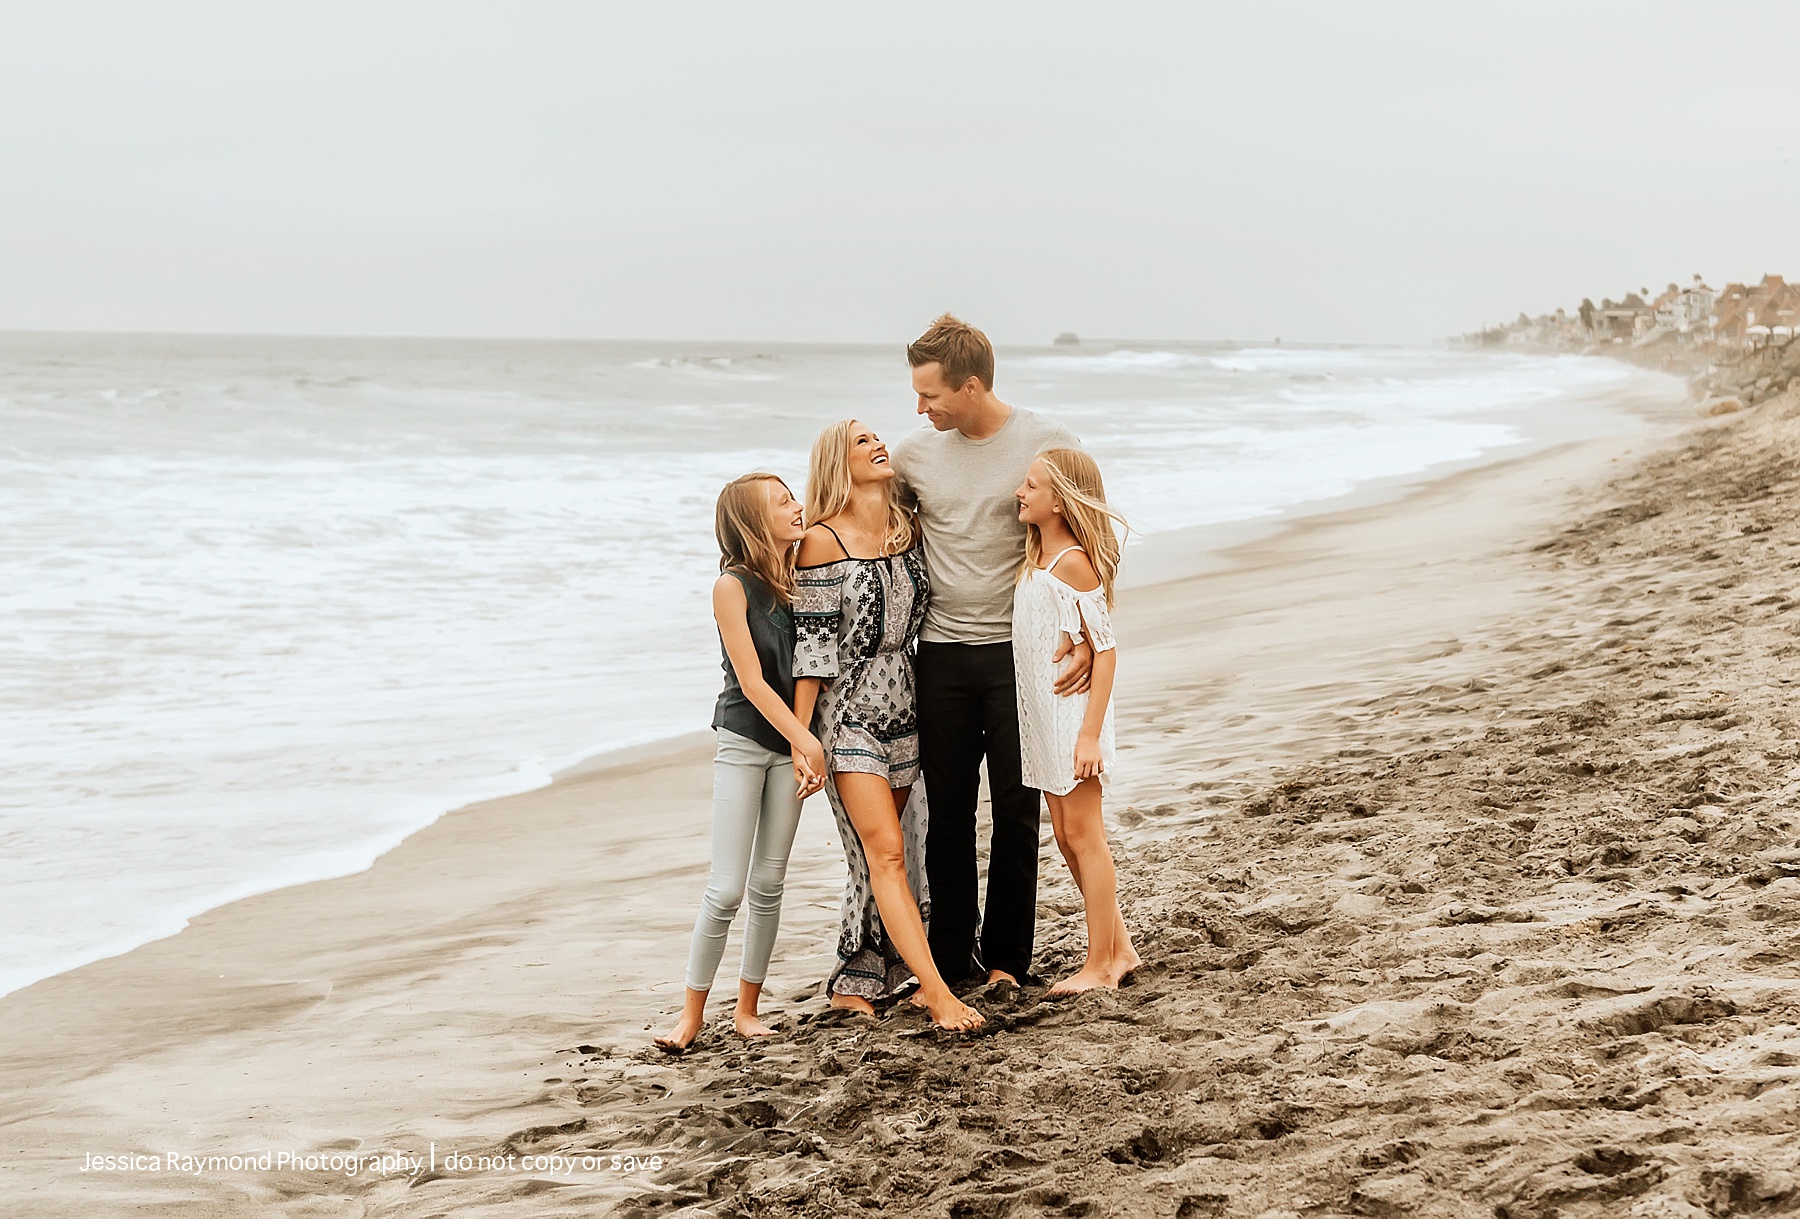 A photographer's complete guide: posing families | Unscripted Photographers